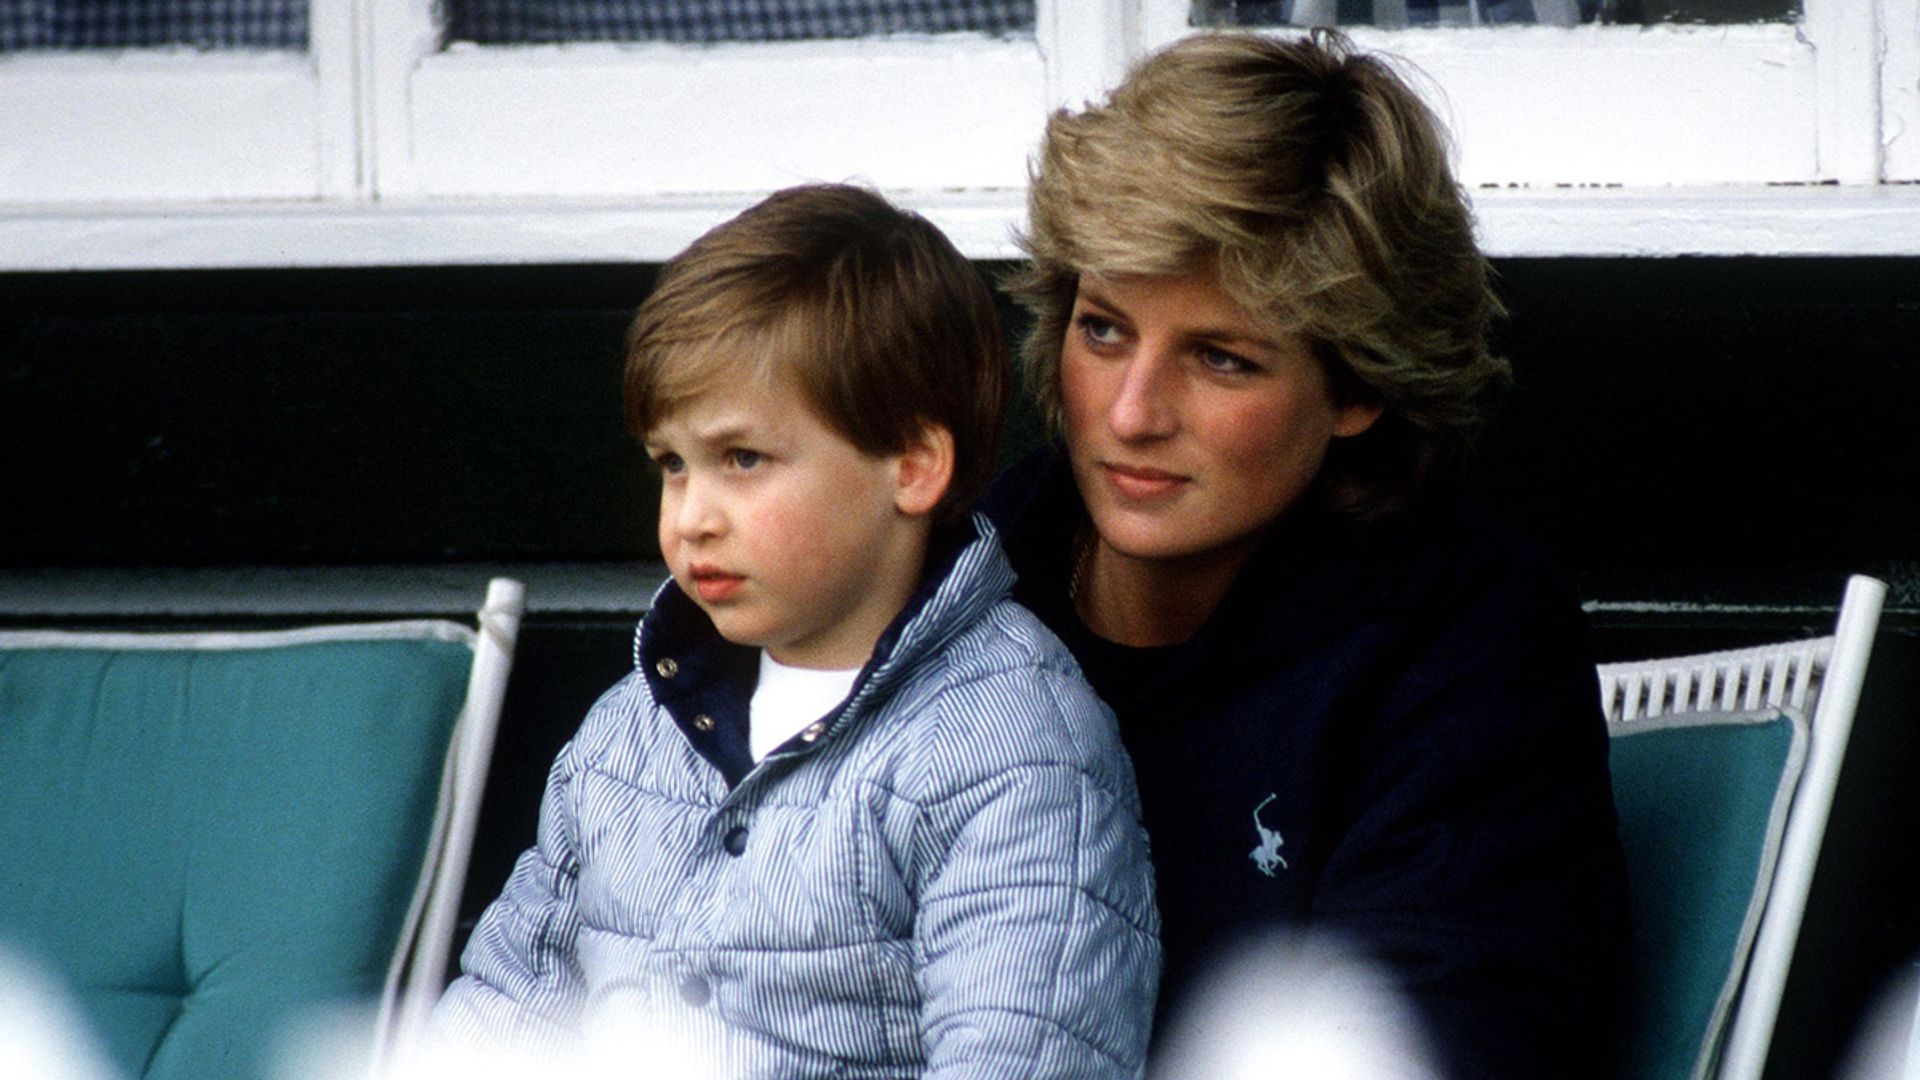 Prince William admits Princess Diana would be 'disappointed' in candid new comments